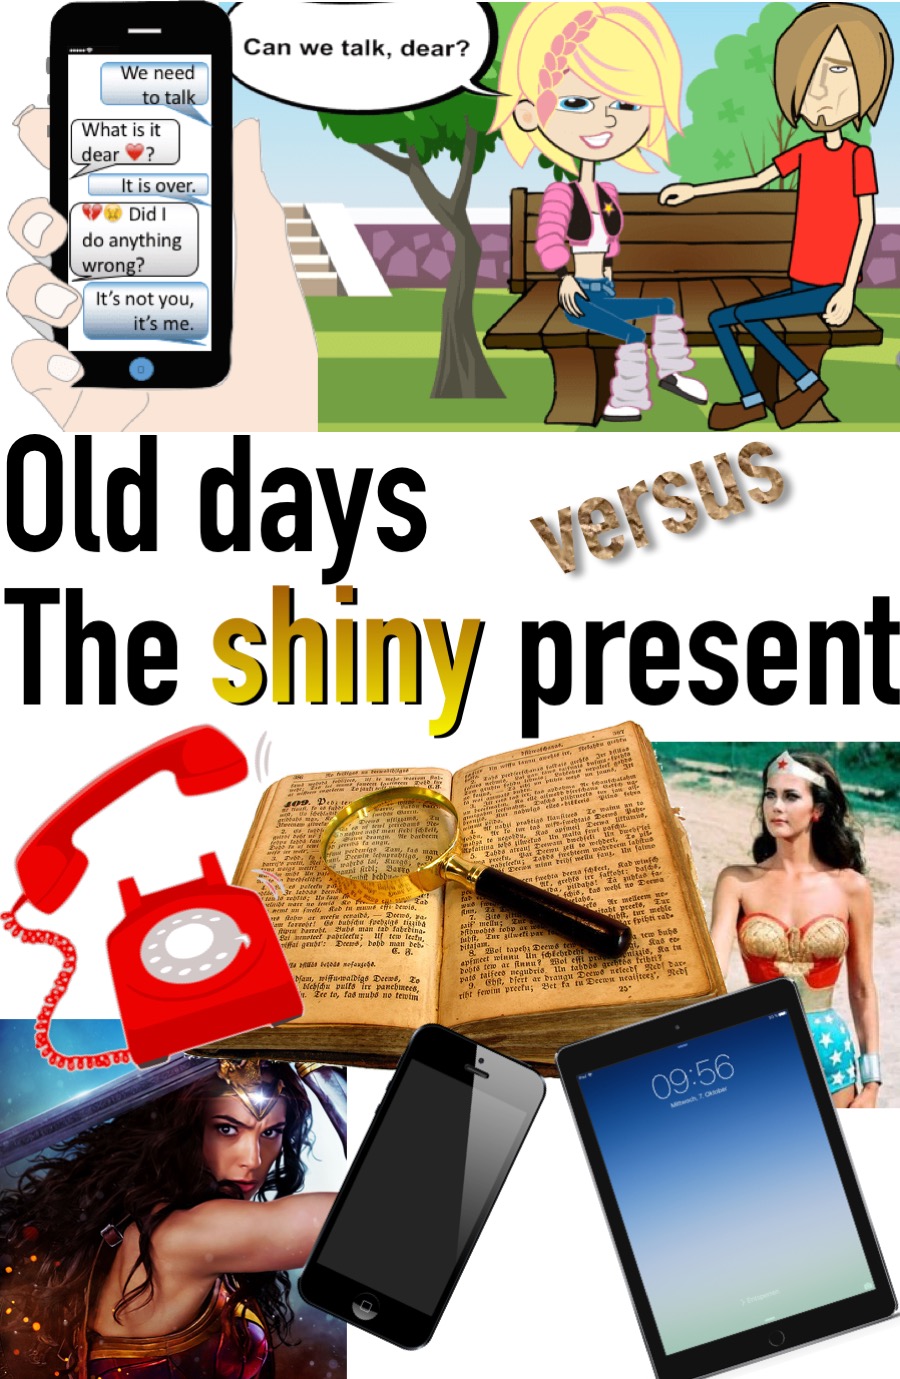 Old days versus the shiny present.